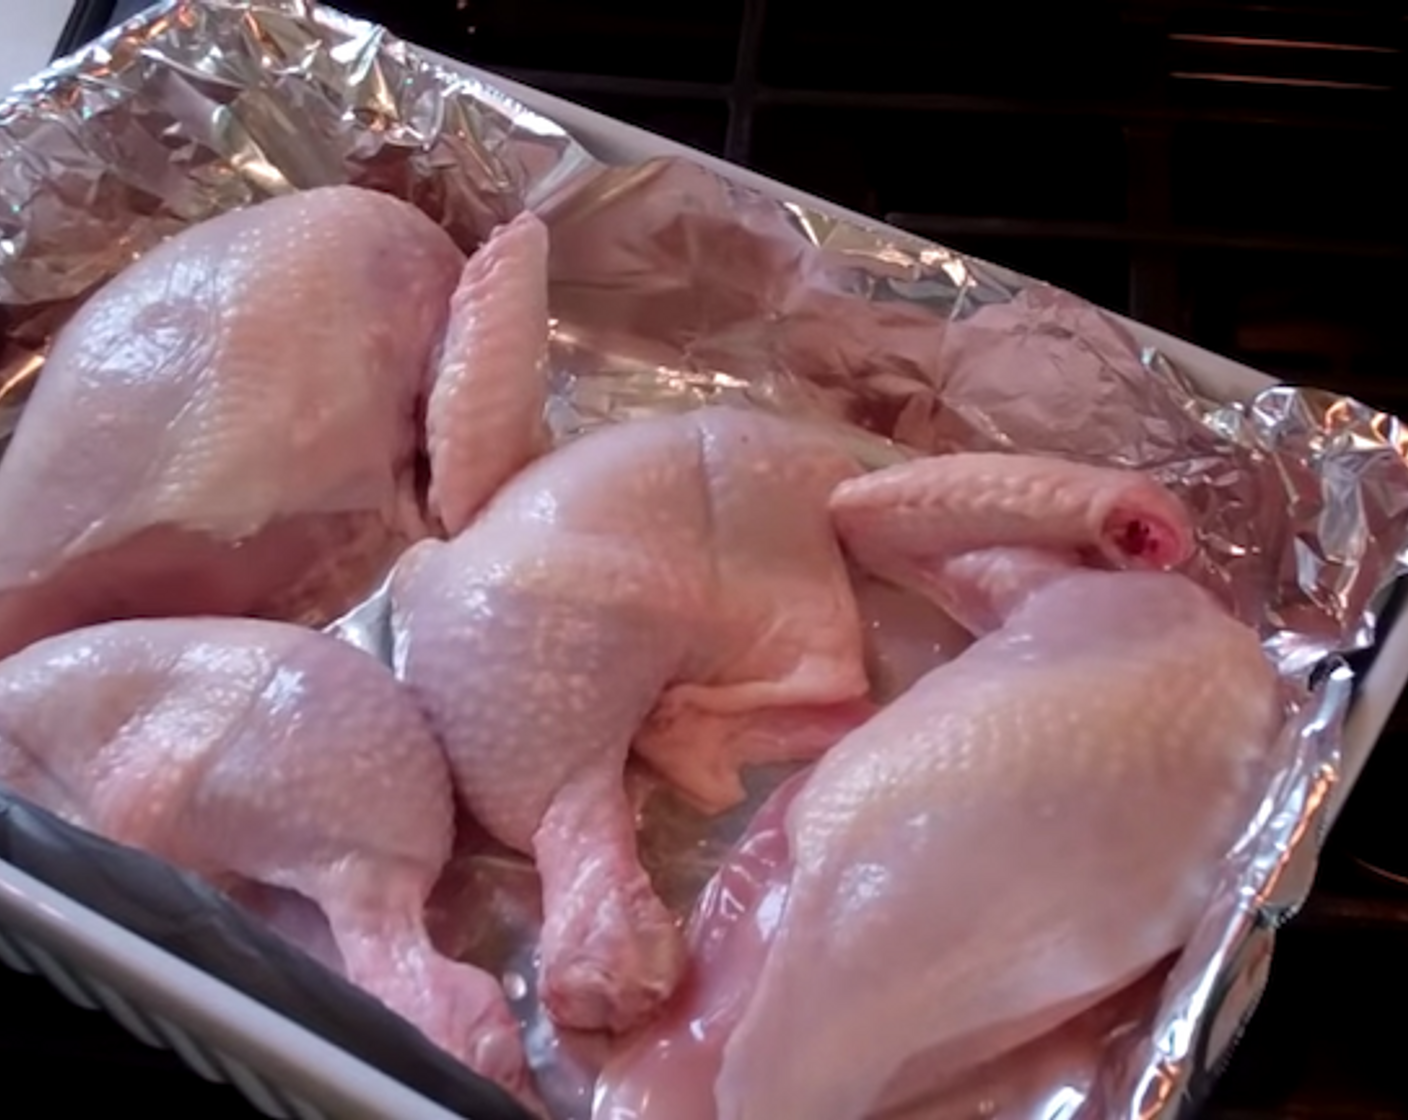 step 2 Cut the Chicken (1) into four pieces. Trim off the fat and excess skin. Wash the chicken pieces with juice from the Lime (1) then rinse with cool water. Pat dry and get ready to season.